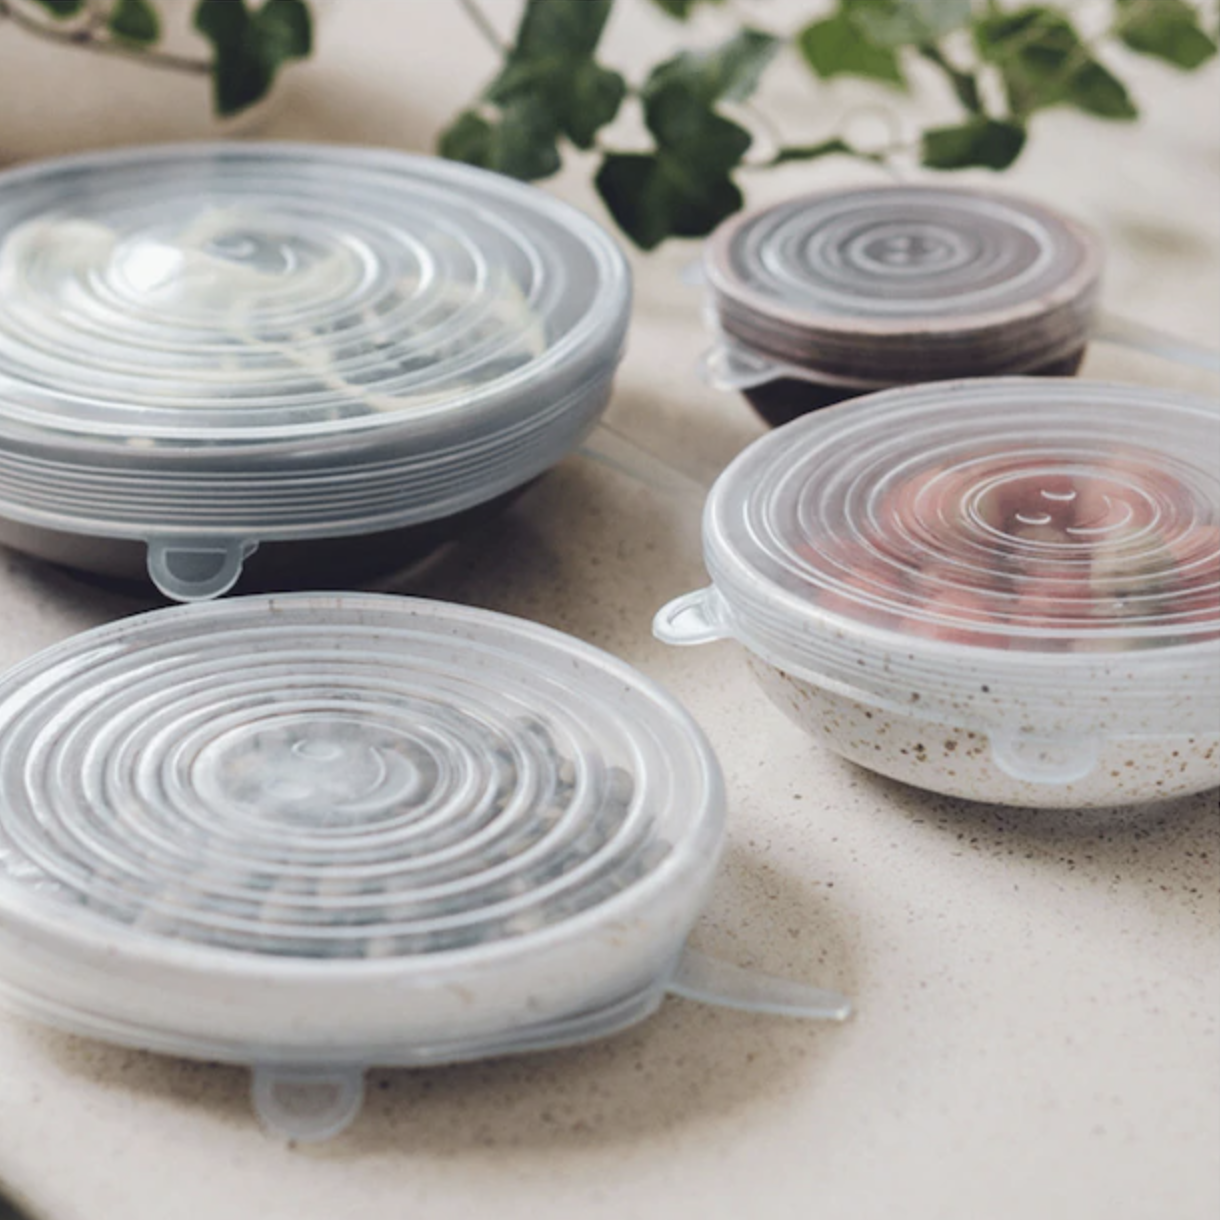 a set of stretchy silicone lids on several bowls